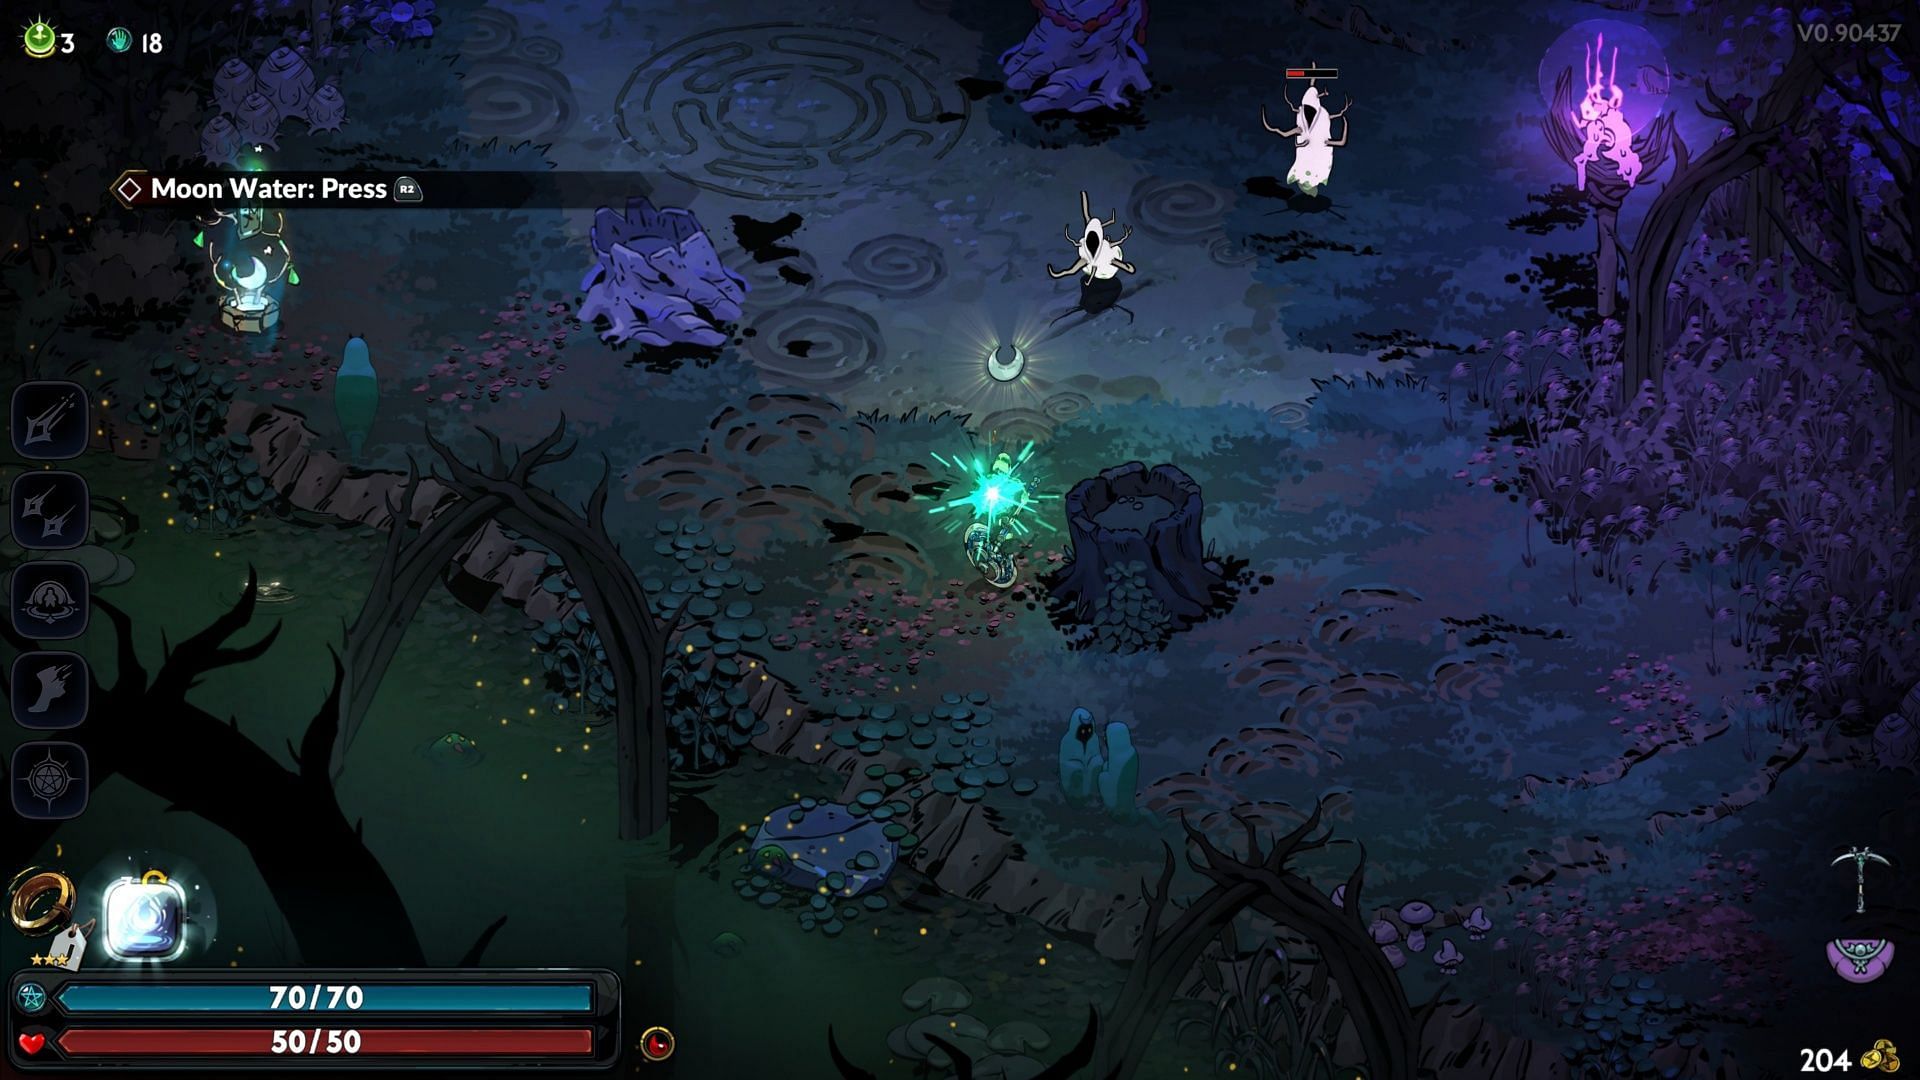 The Moonstone Axe is slow but can deal a lot of damage (Image via Supergiant Games)